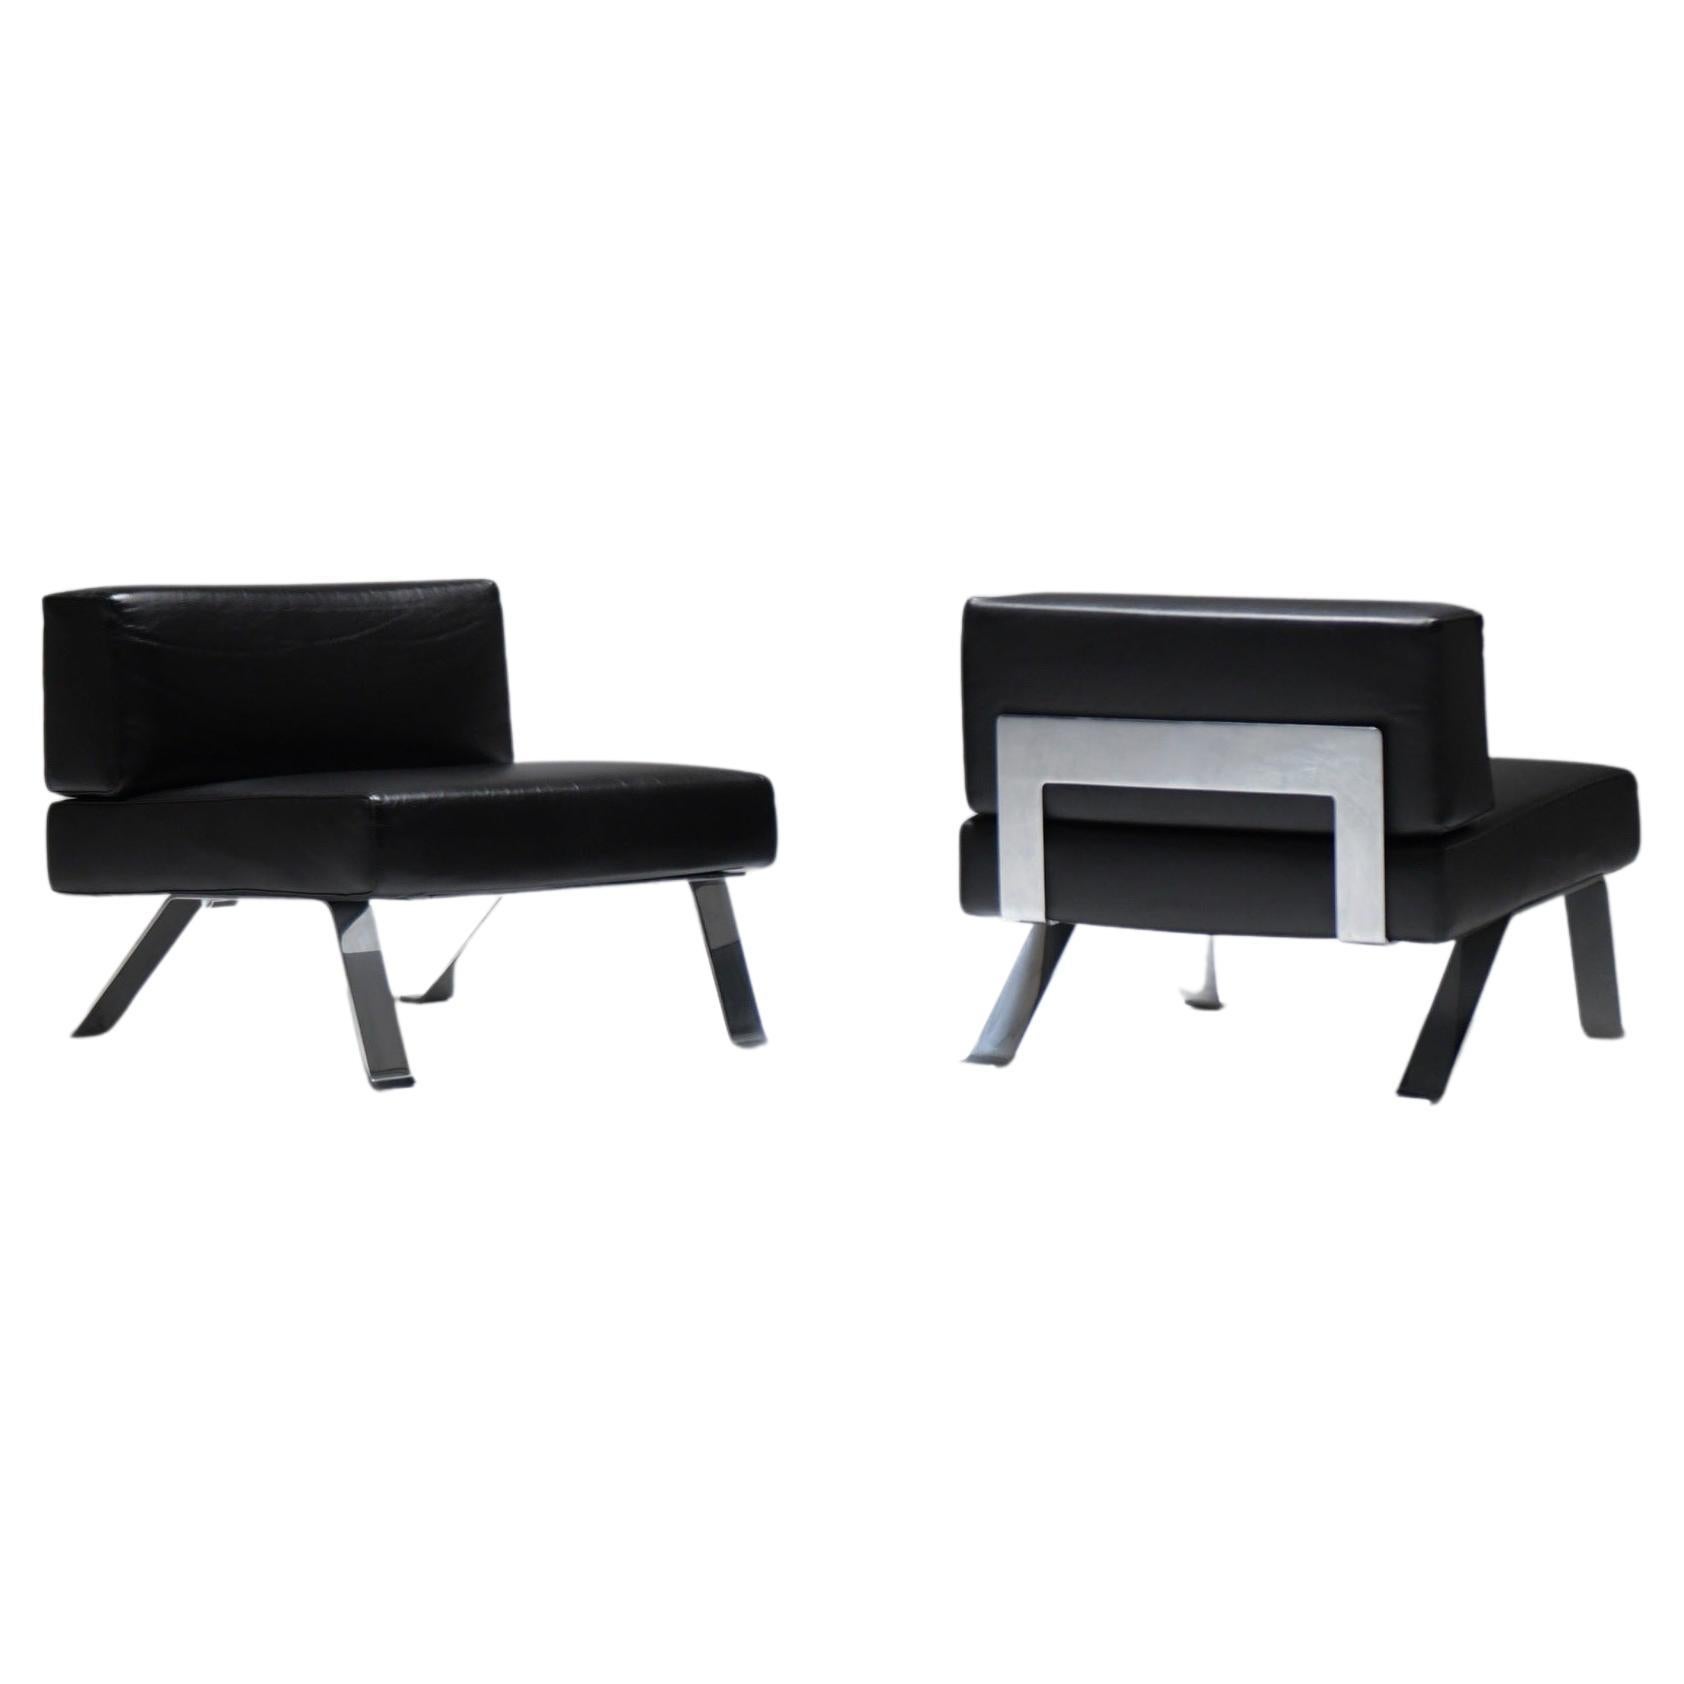 Black leather Ombra 512 lounge chairs by Charlotte Perriand for Cassina Italy